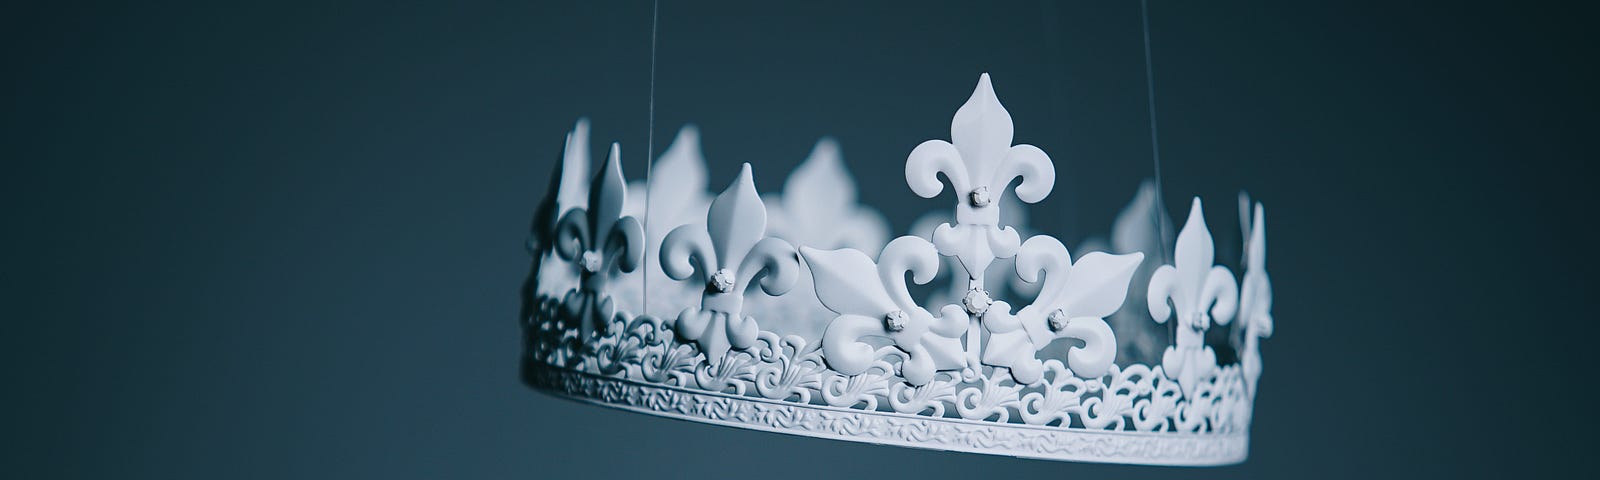 a white crown hangs in a blue background